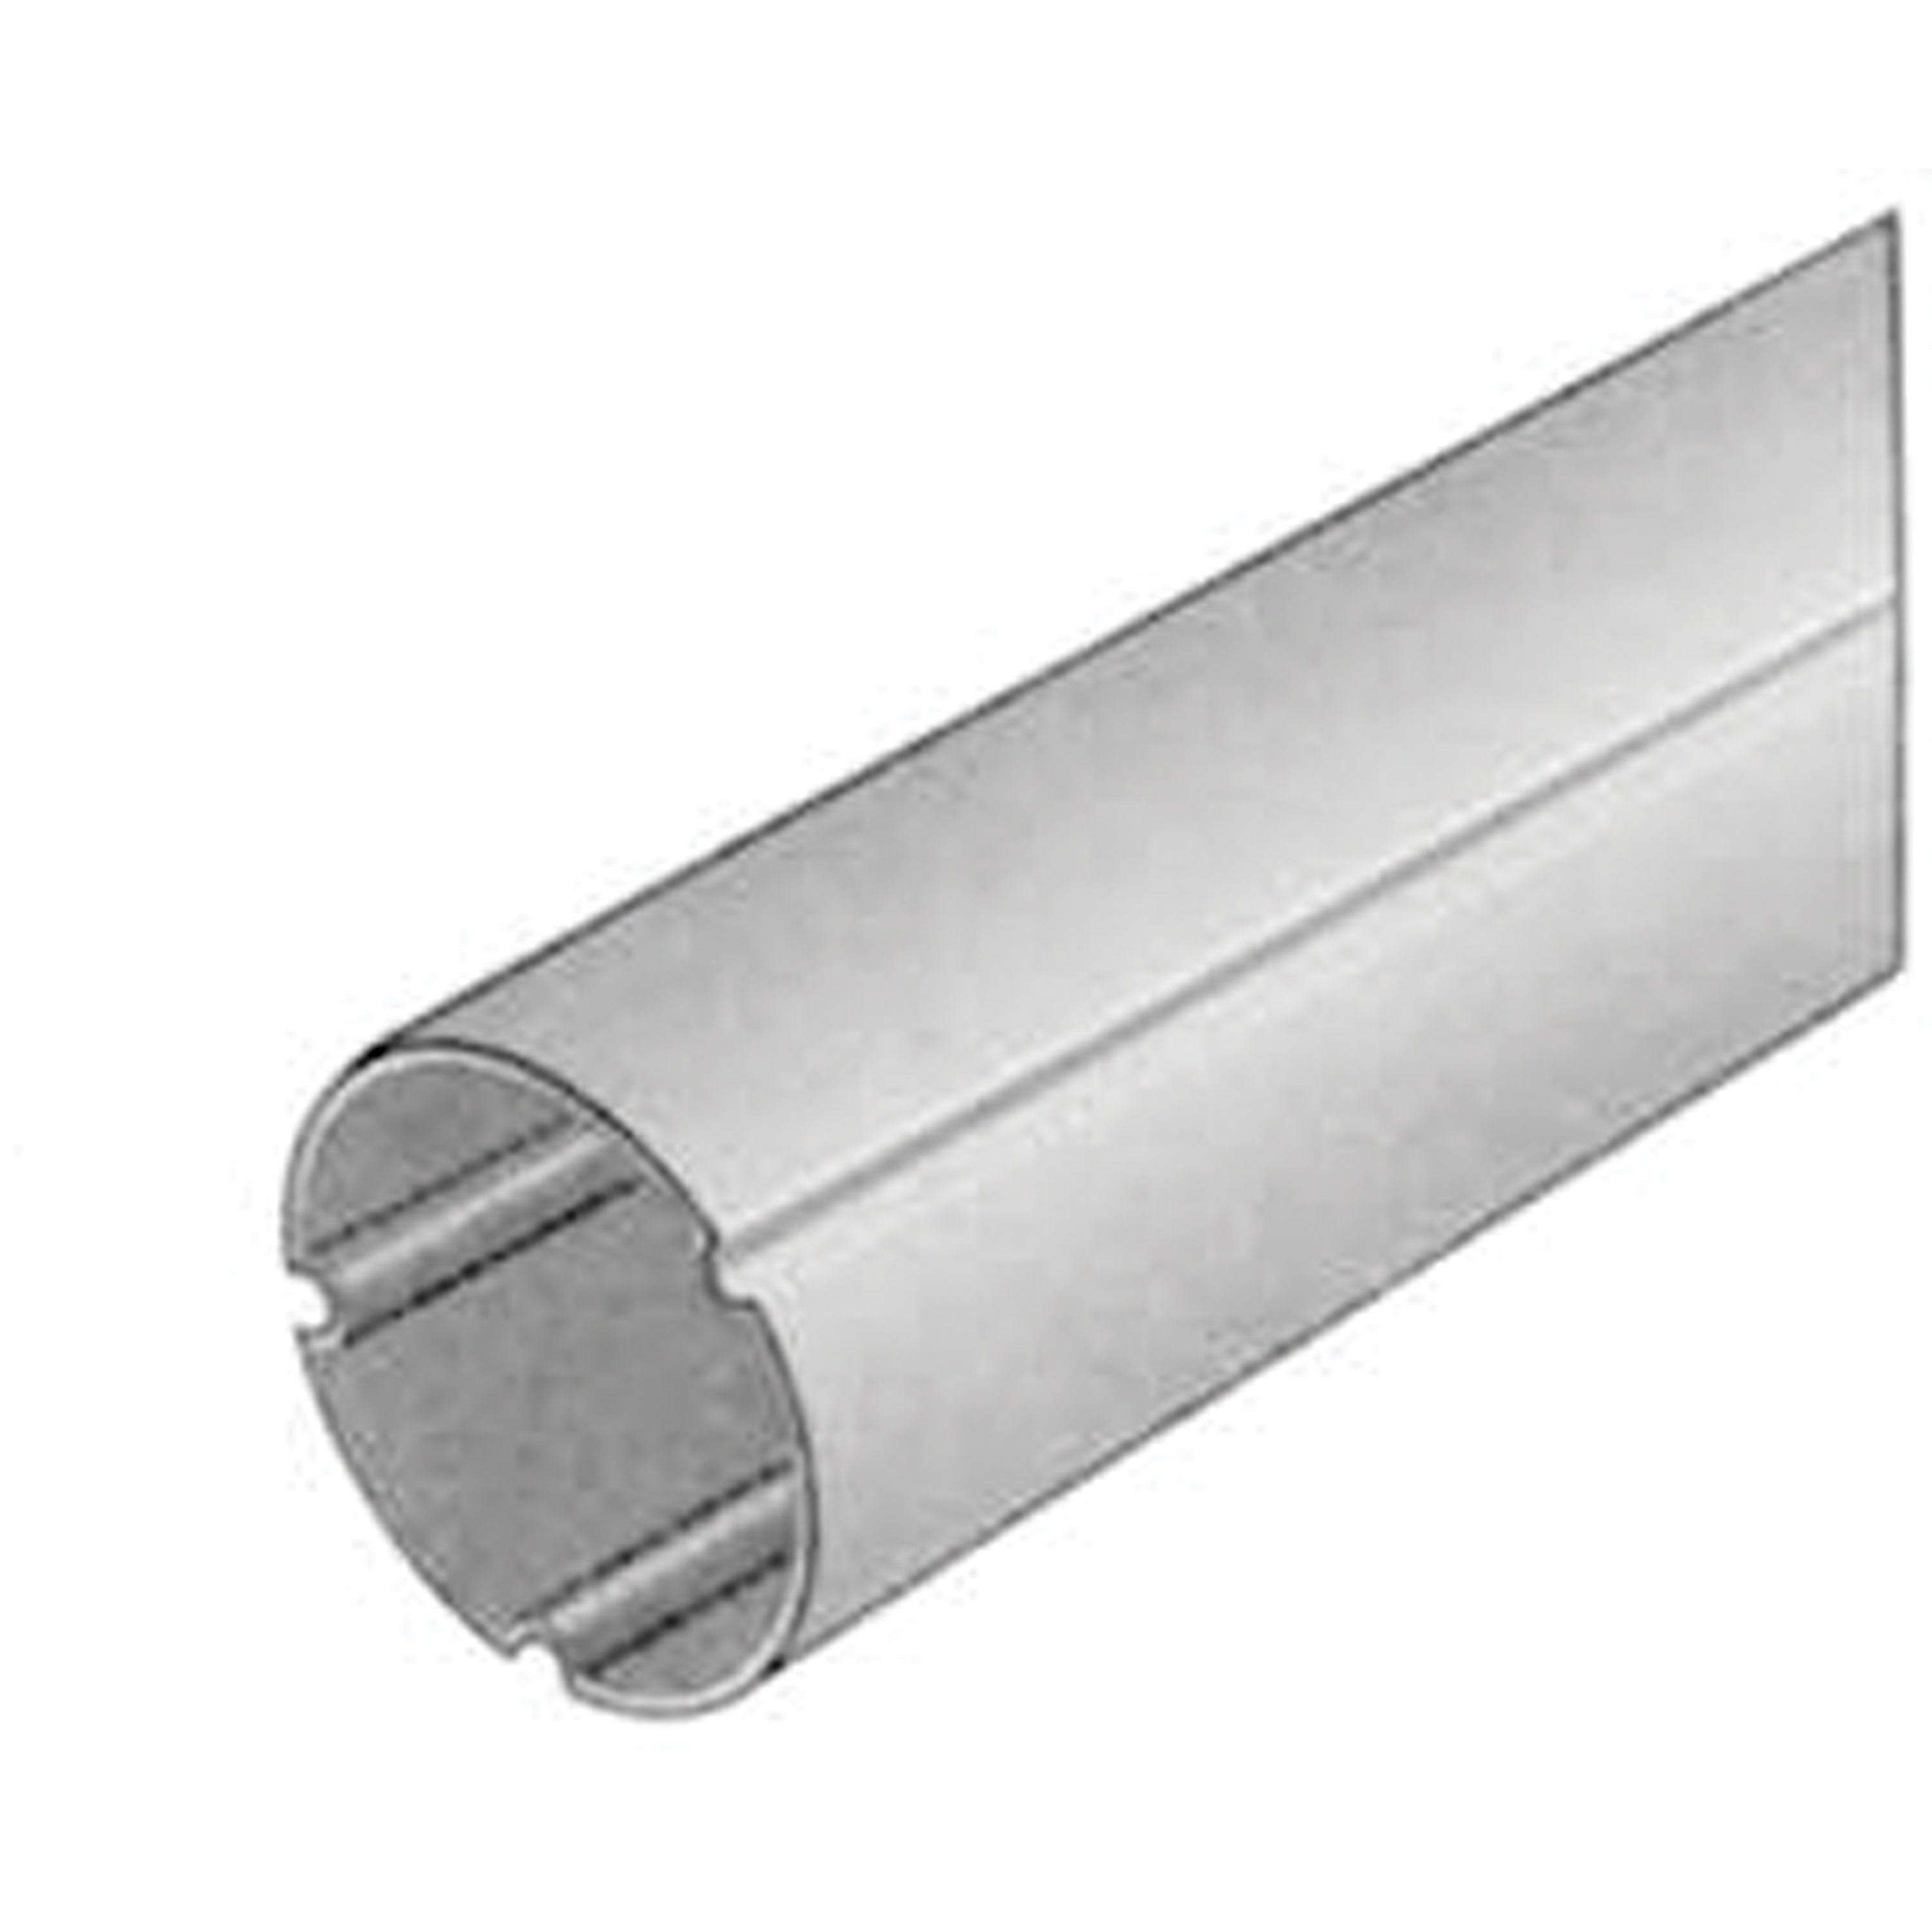 Dometic 3108346.019 Replacement Aluminum Awning Roller Tube - 19 ft.